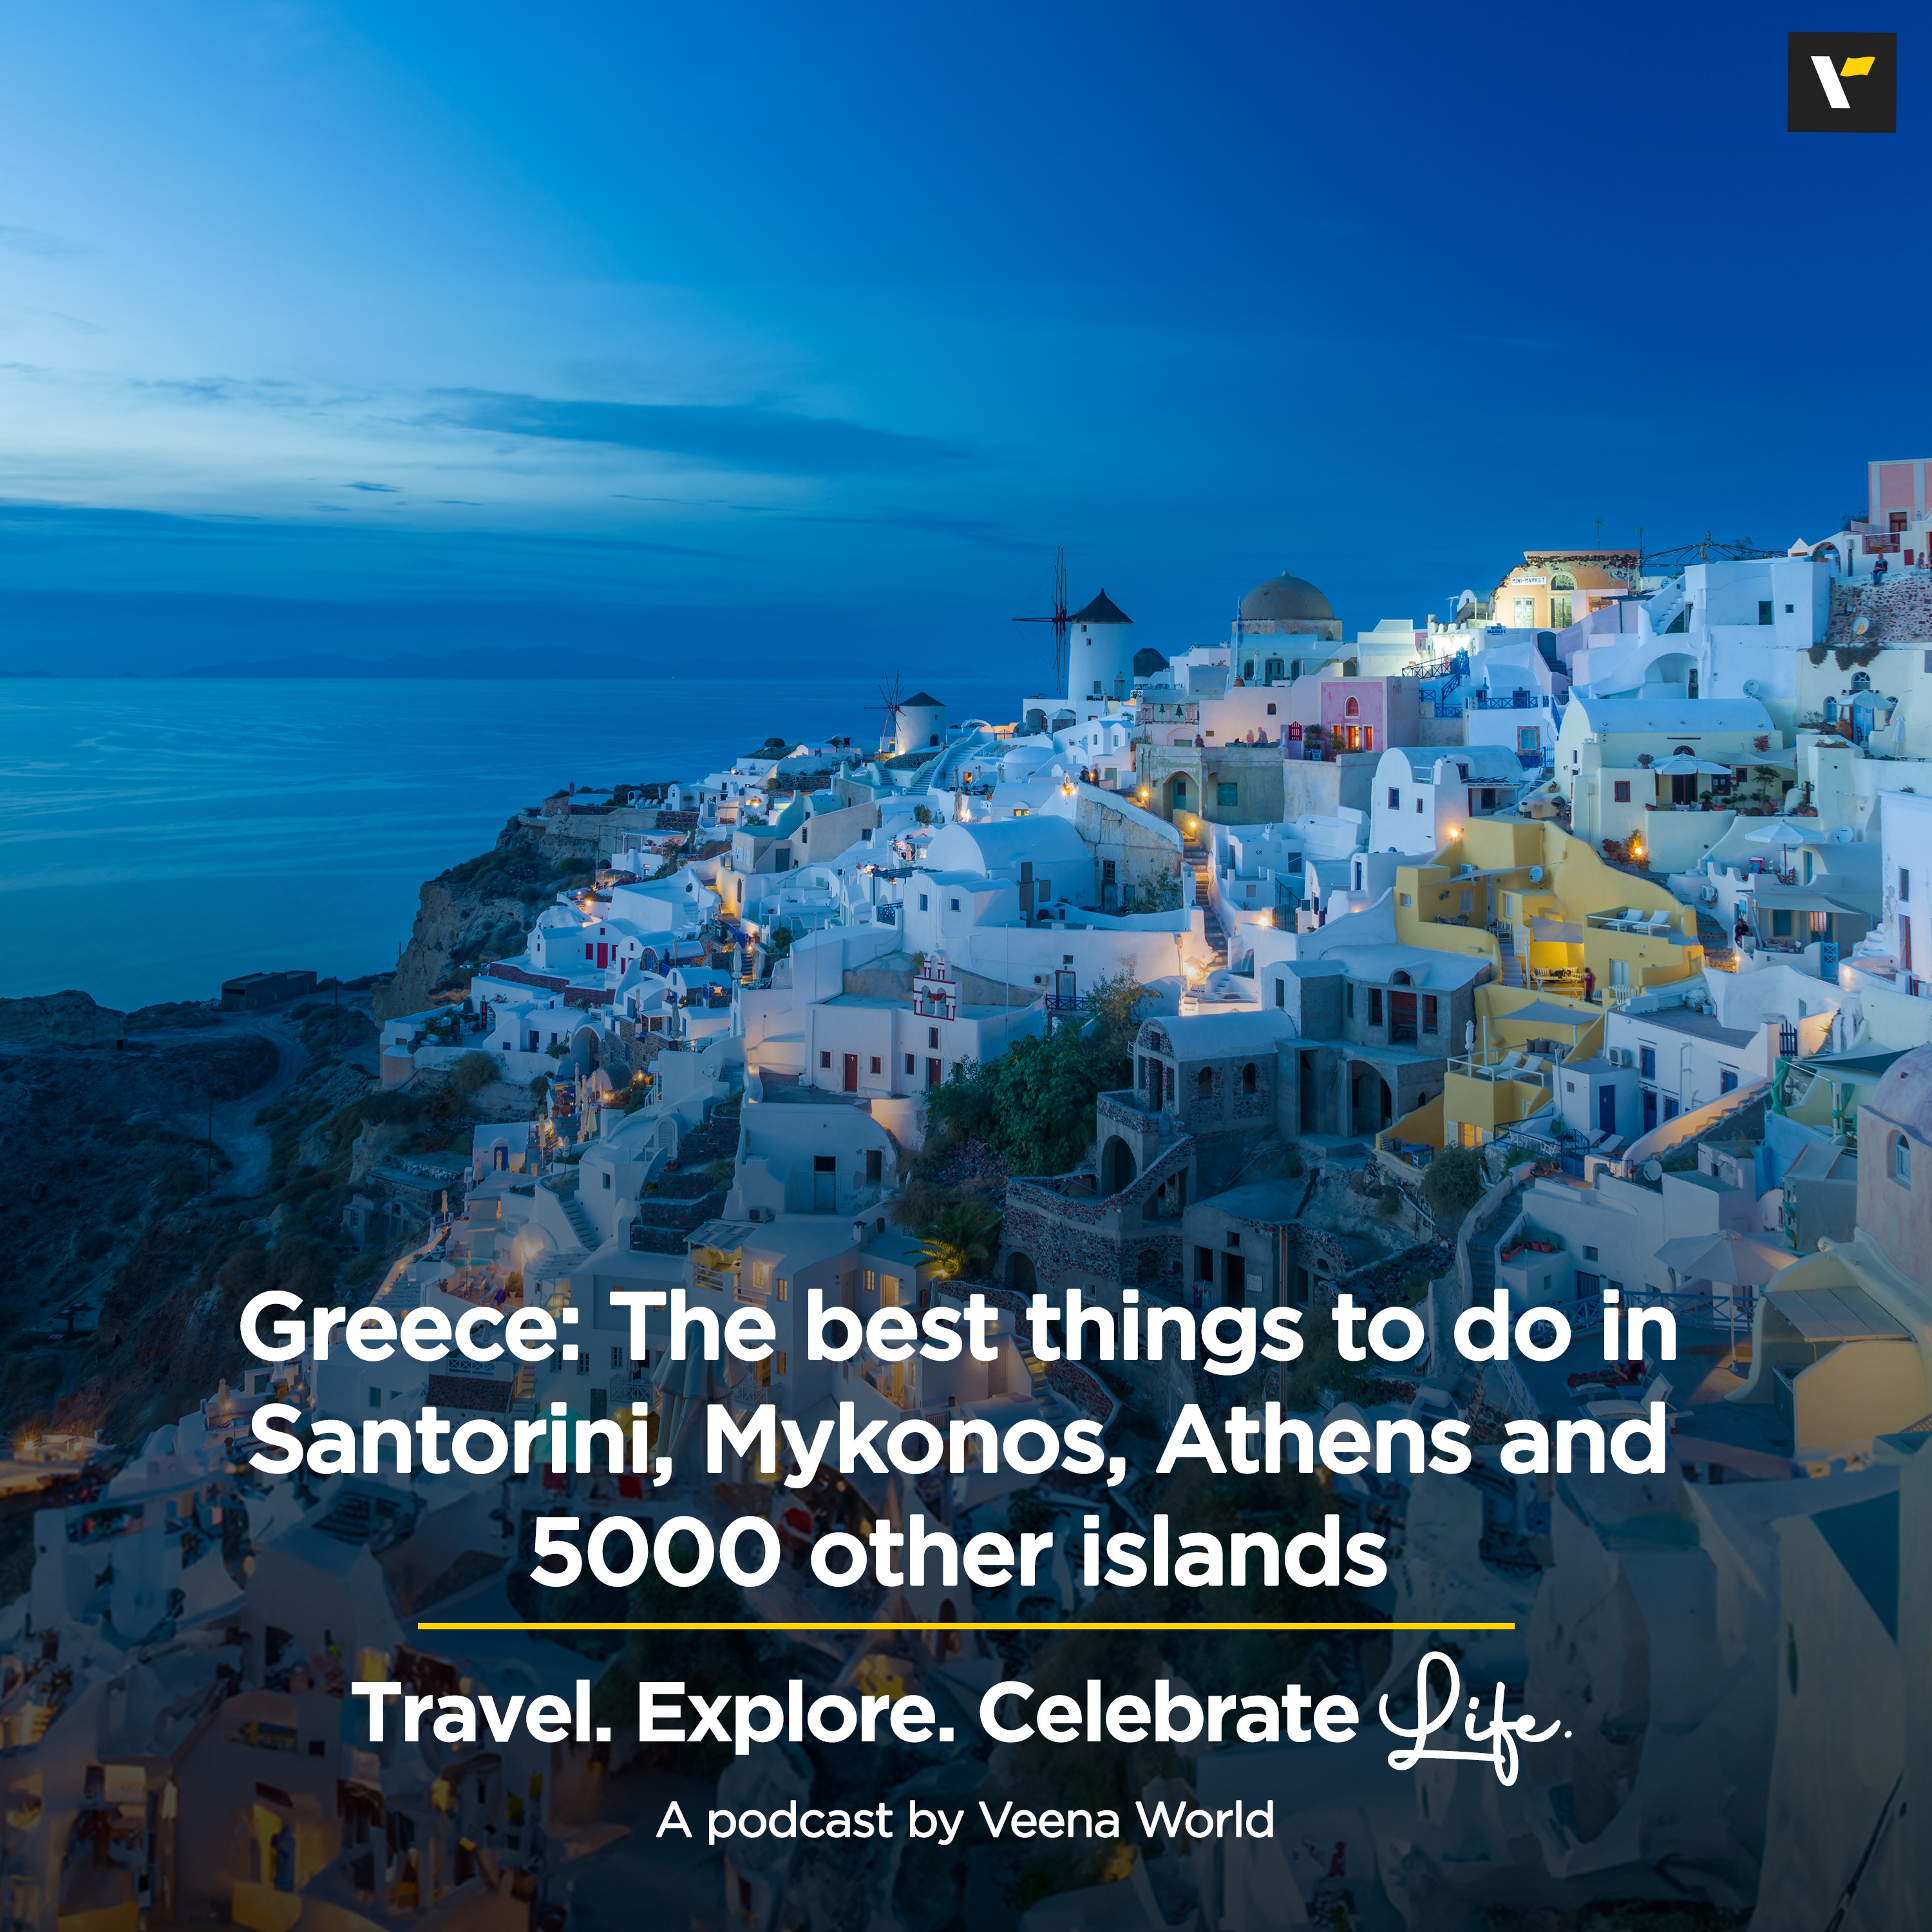 Greece: The best things to do in Santorini, Mykonos, Athens and 5000 other islands